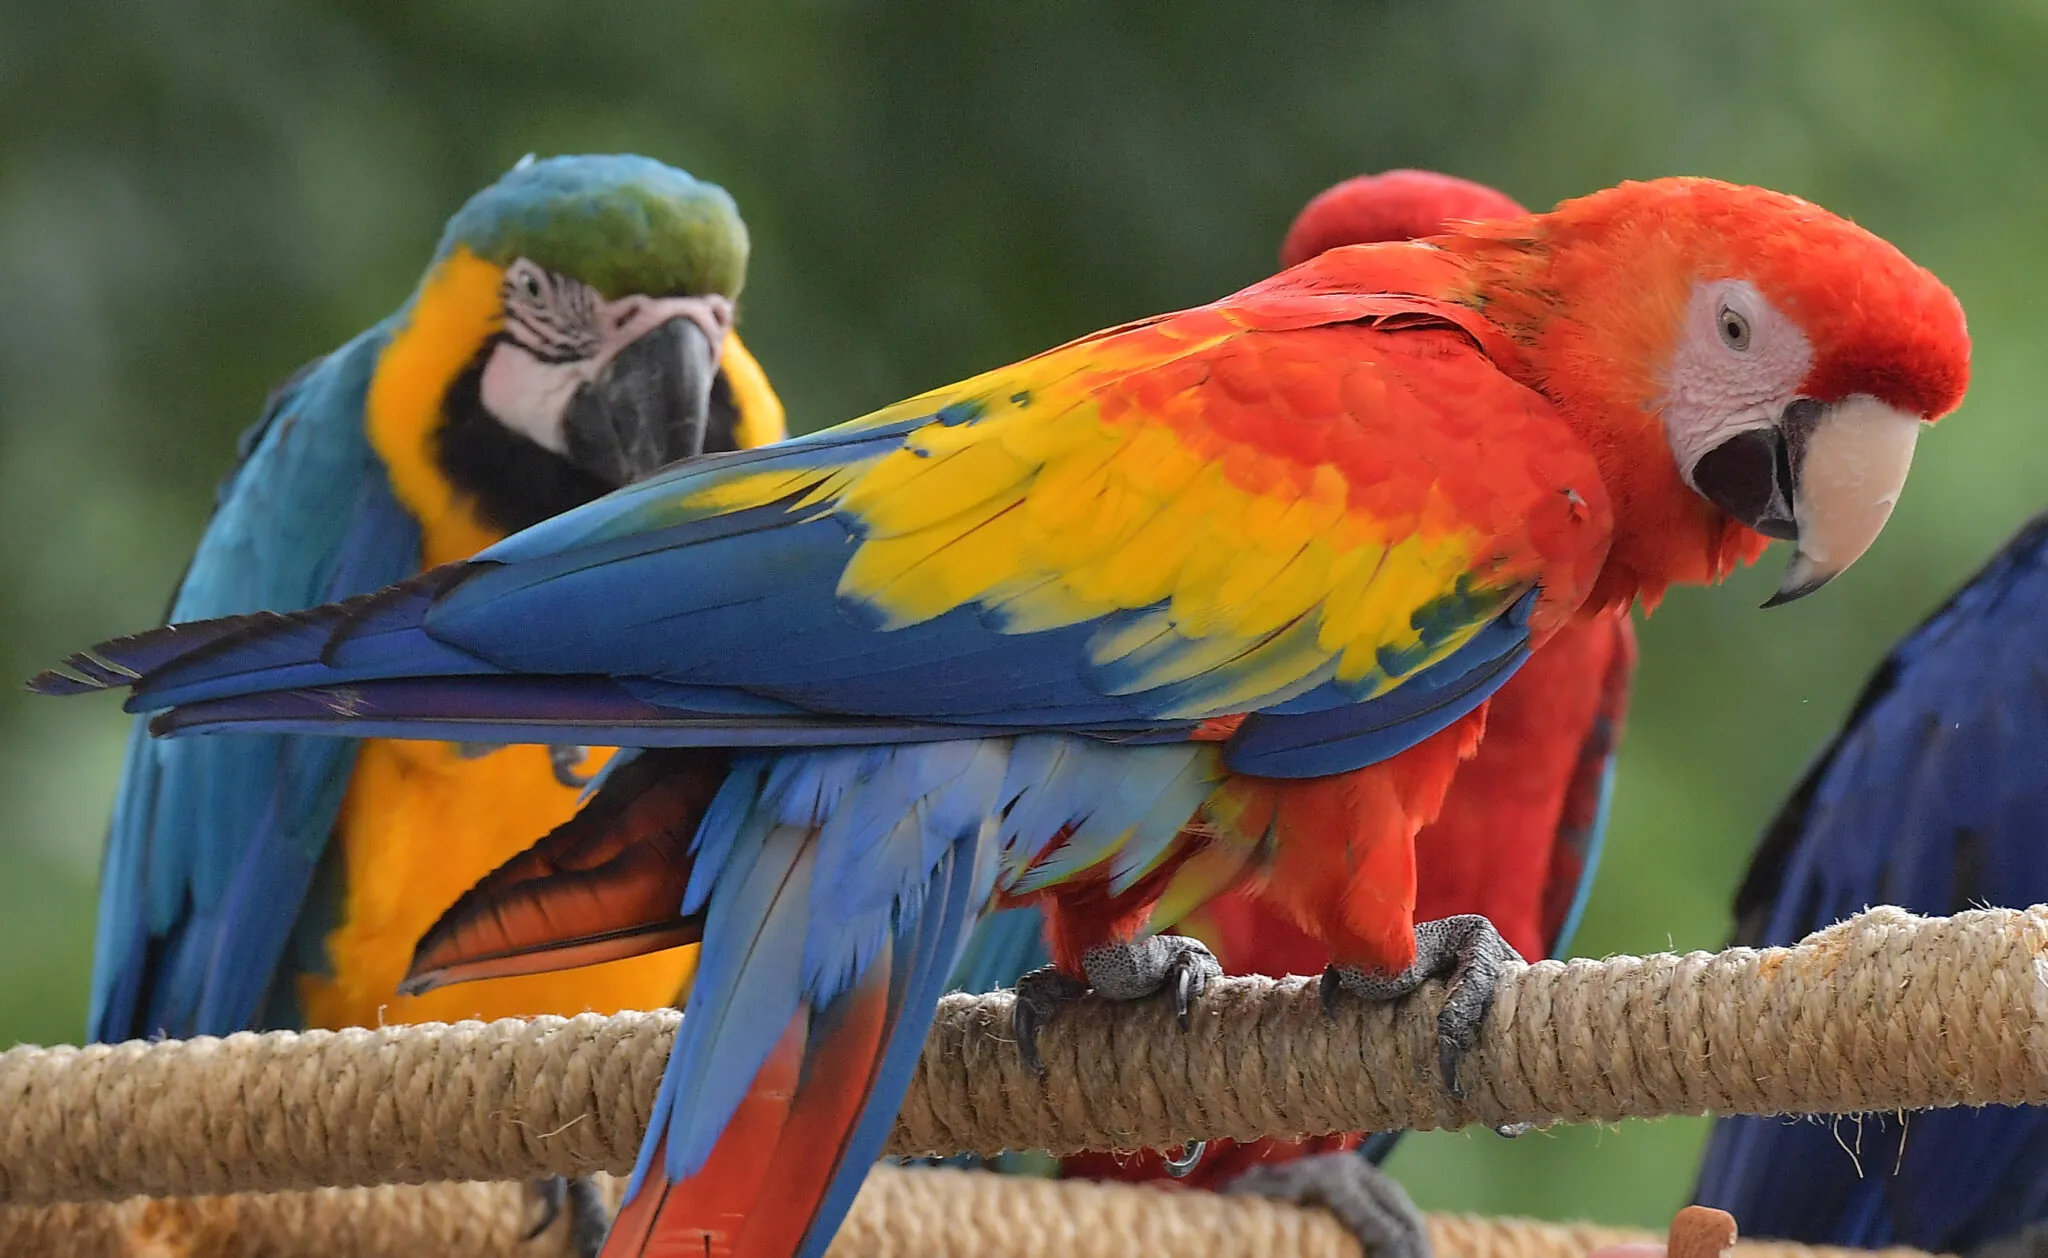 Macaws on a perch